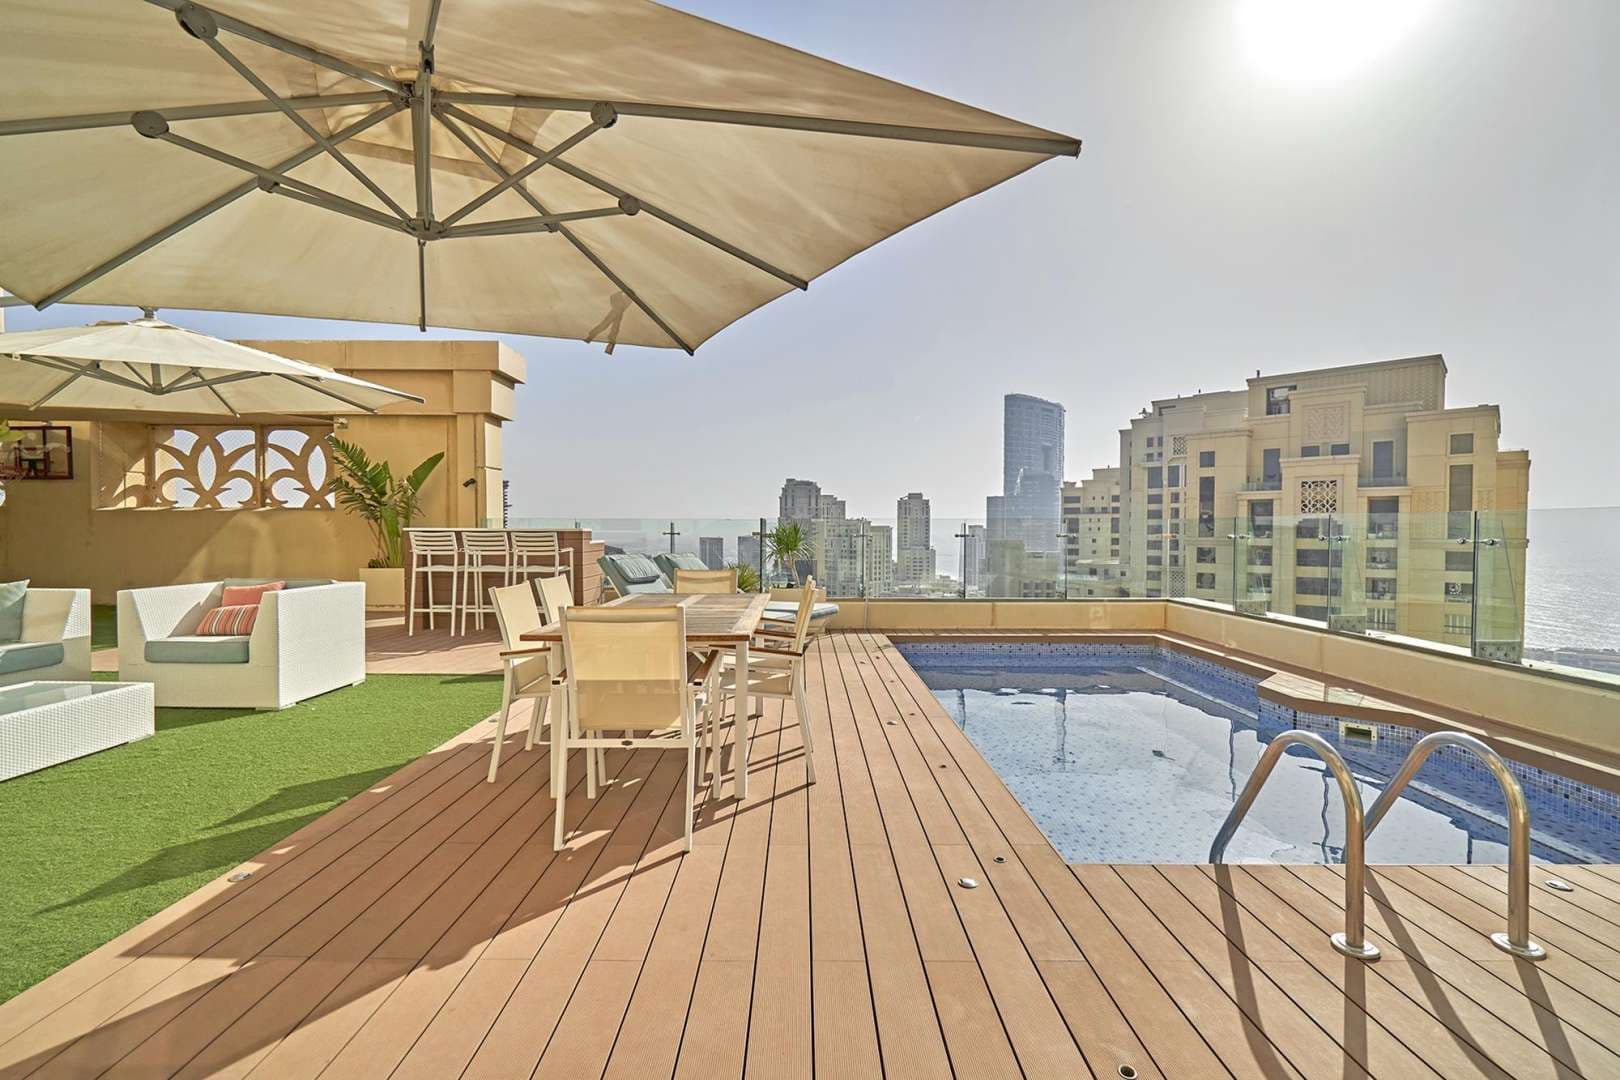 5 Bedroom Penthouse For Sale Rimal 1 Lp06331 15ac651077a6aa00.jpg